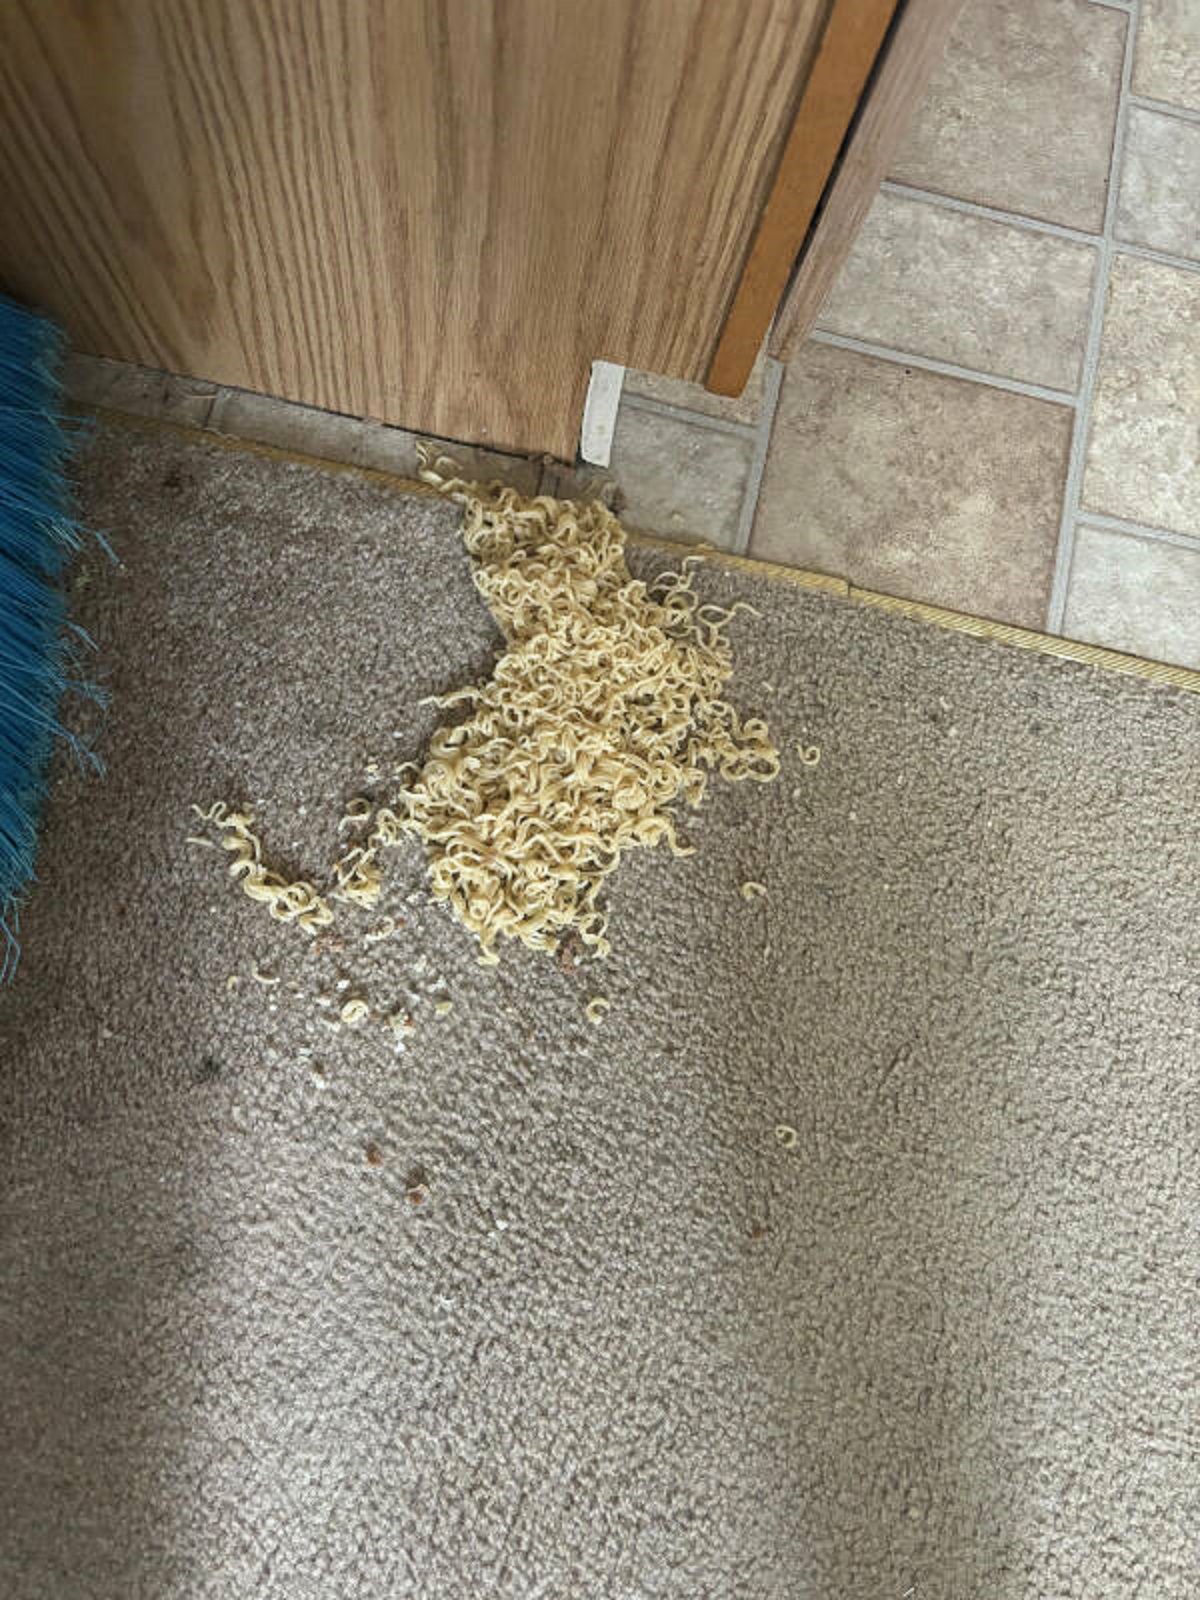 “Made a microwave ramen bowl for lunch and the bottom randomly gave out, dumping the scalding hot noodles all over my bare feet”